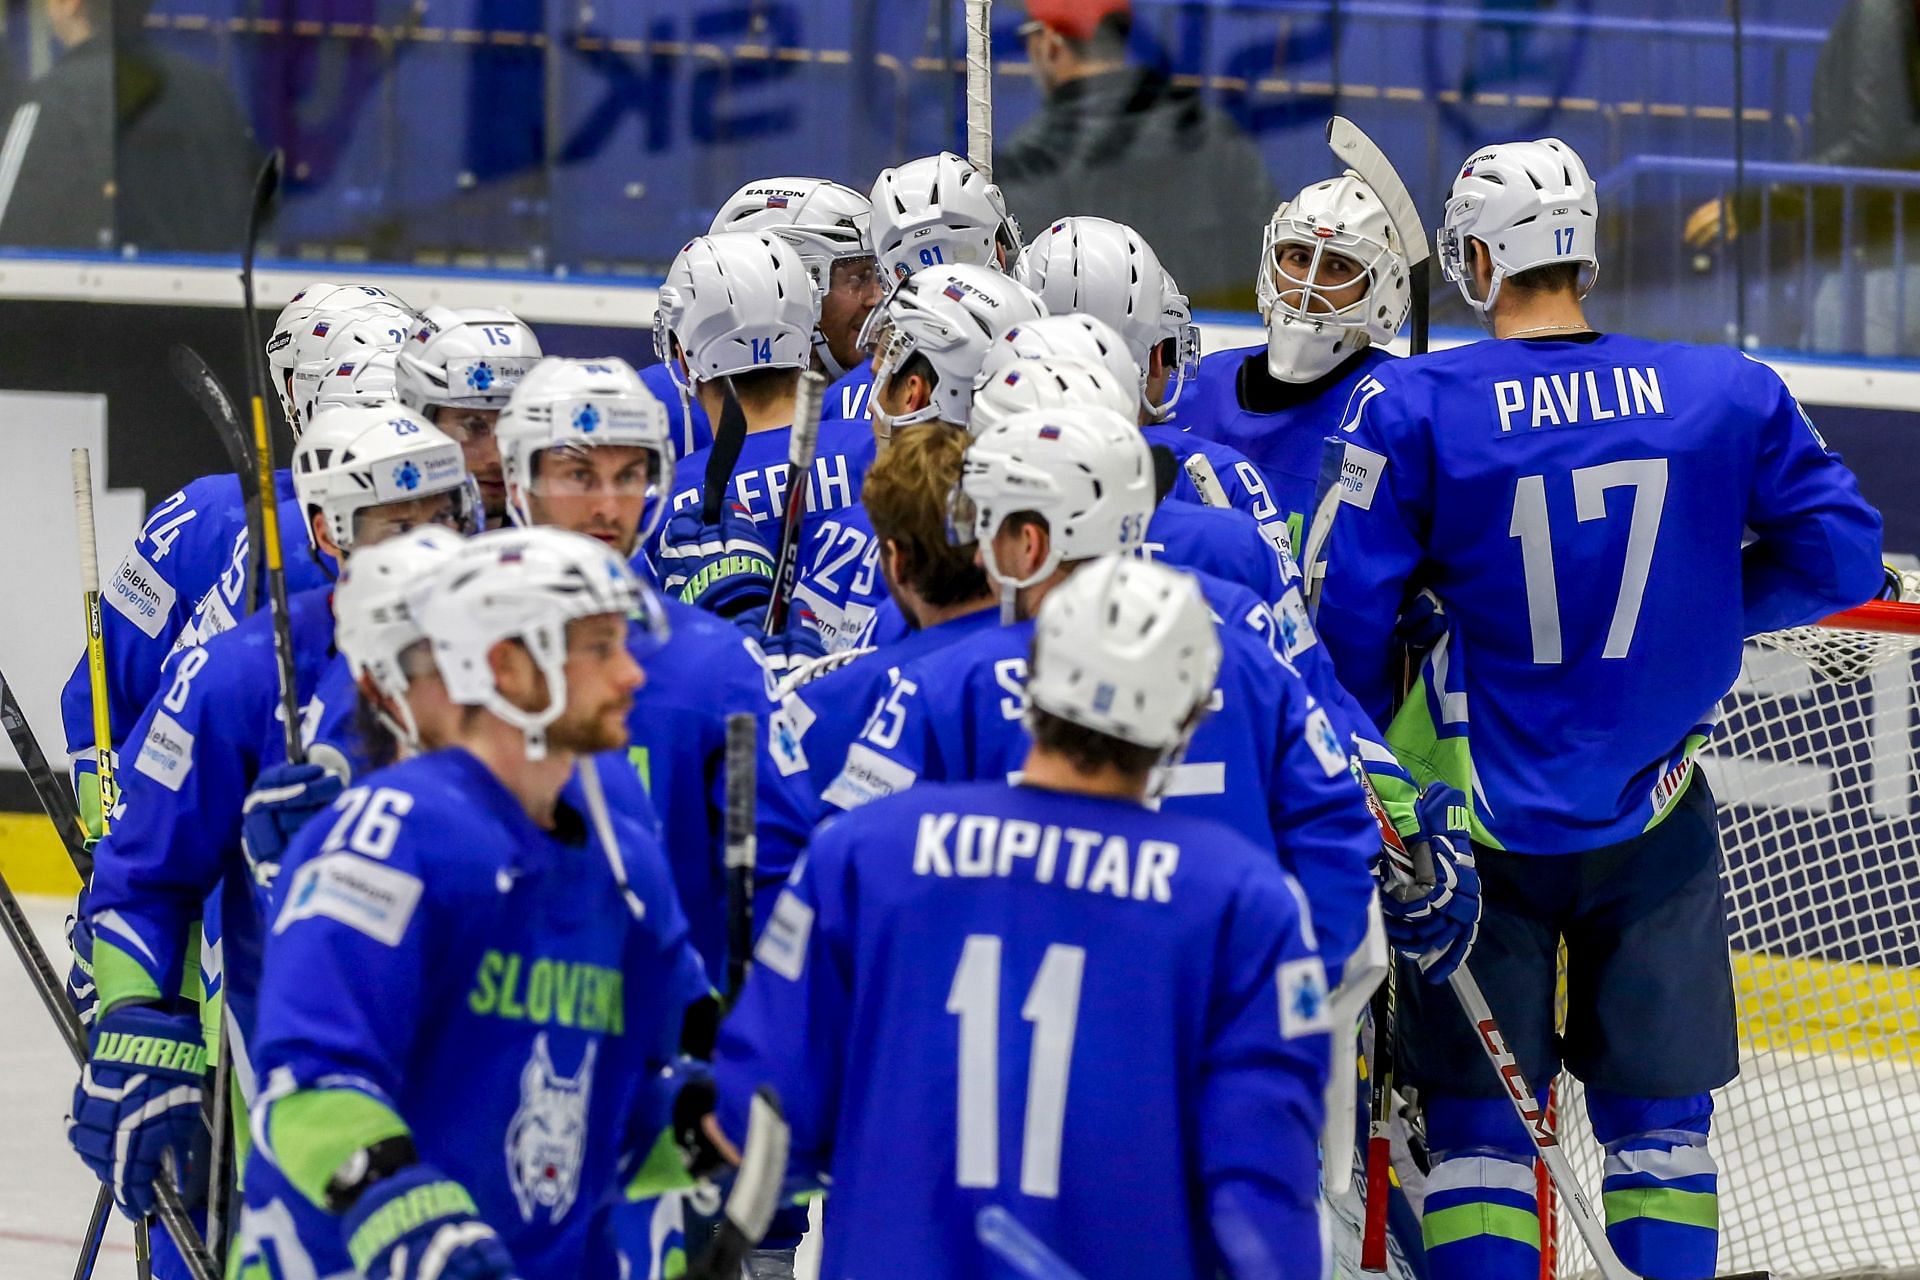 Who are clubs to watch as new Czech ice hockey season begins